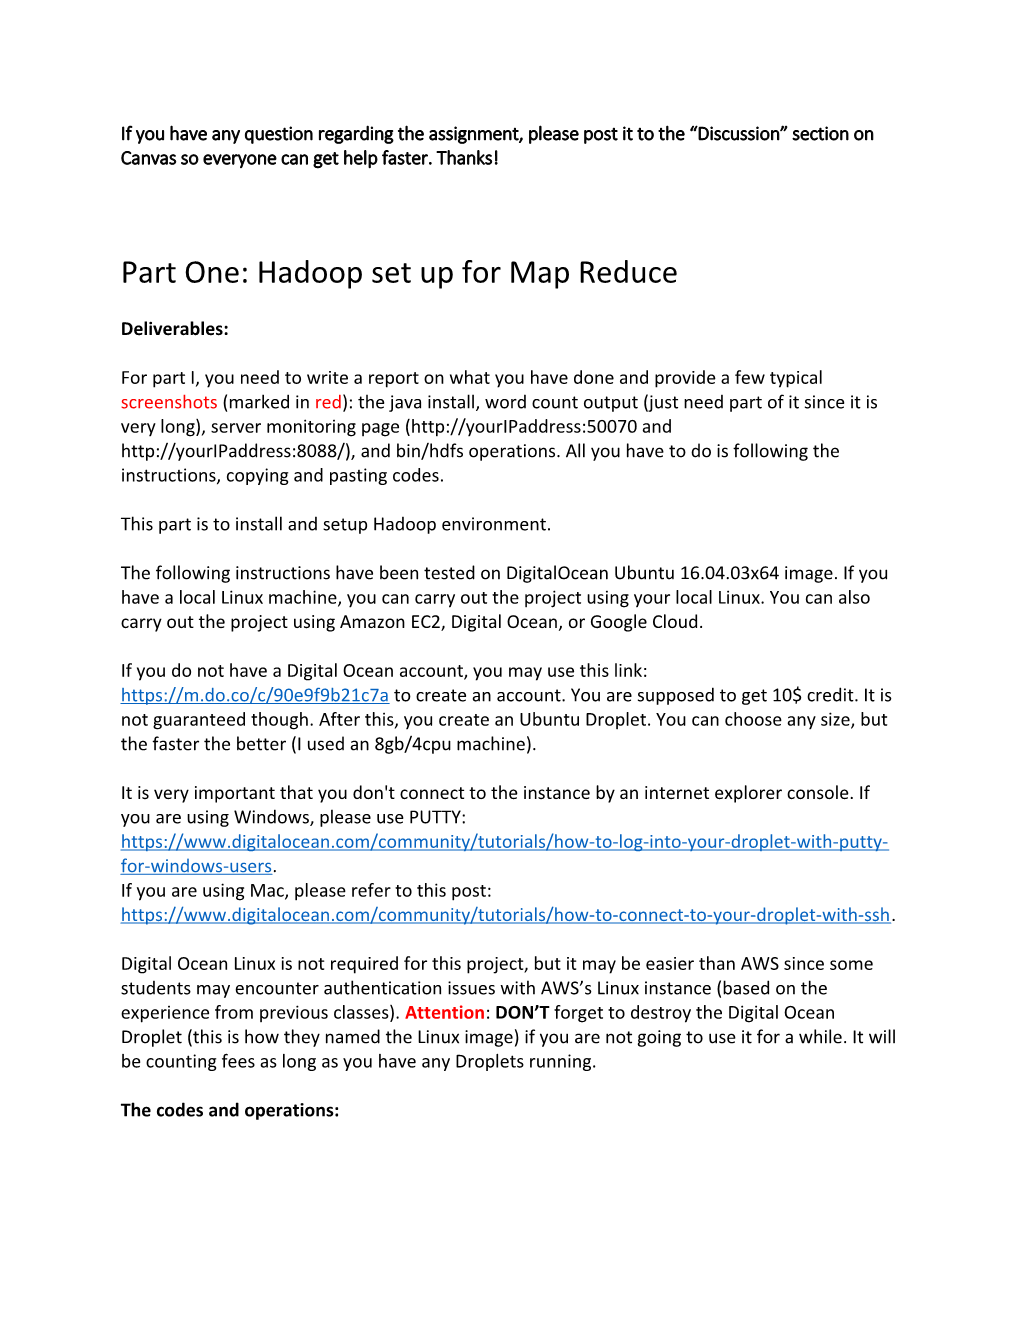 Part One: Hadoop Set up for Map Reduce